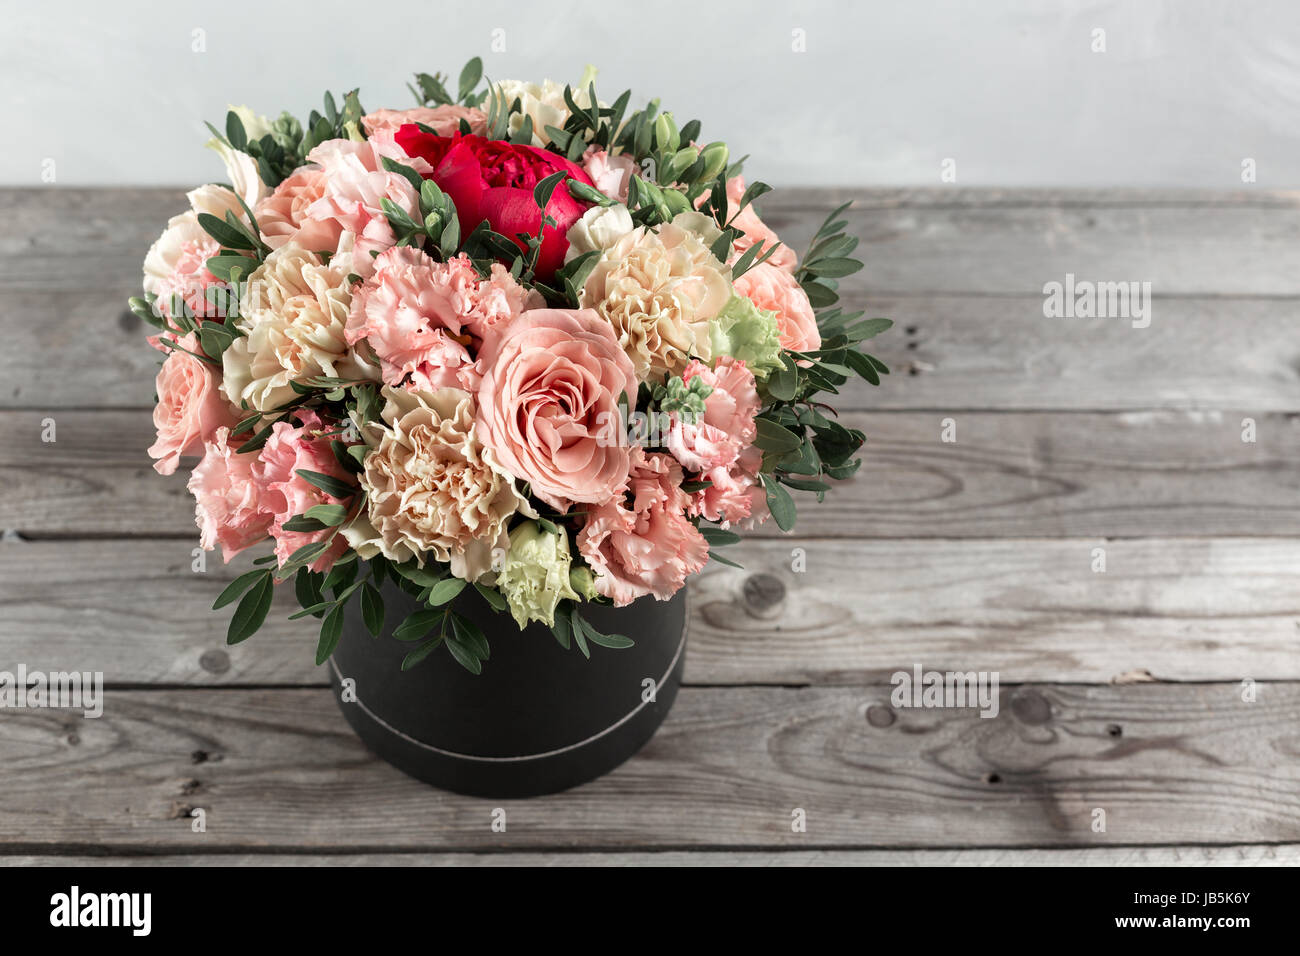 luxurious and elegant bouquet of roses and Other colors flowers on wooden background, copy space. Stock Photo